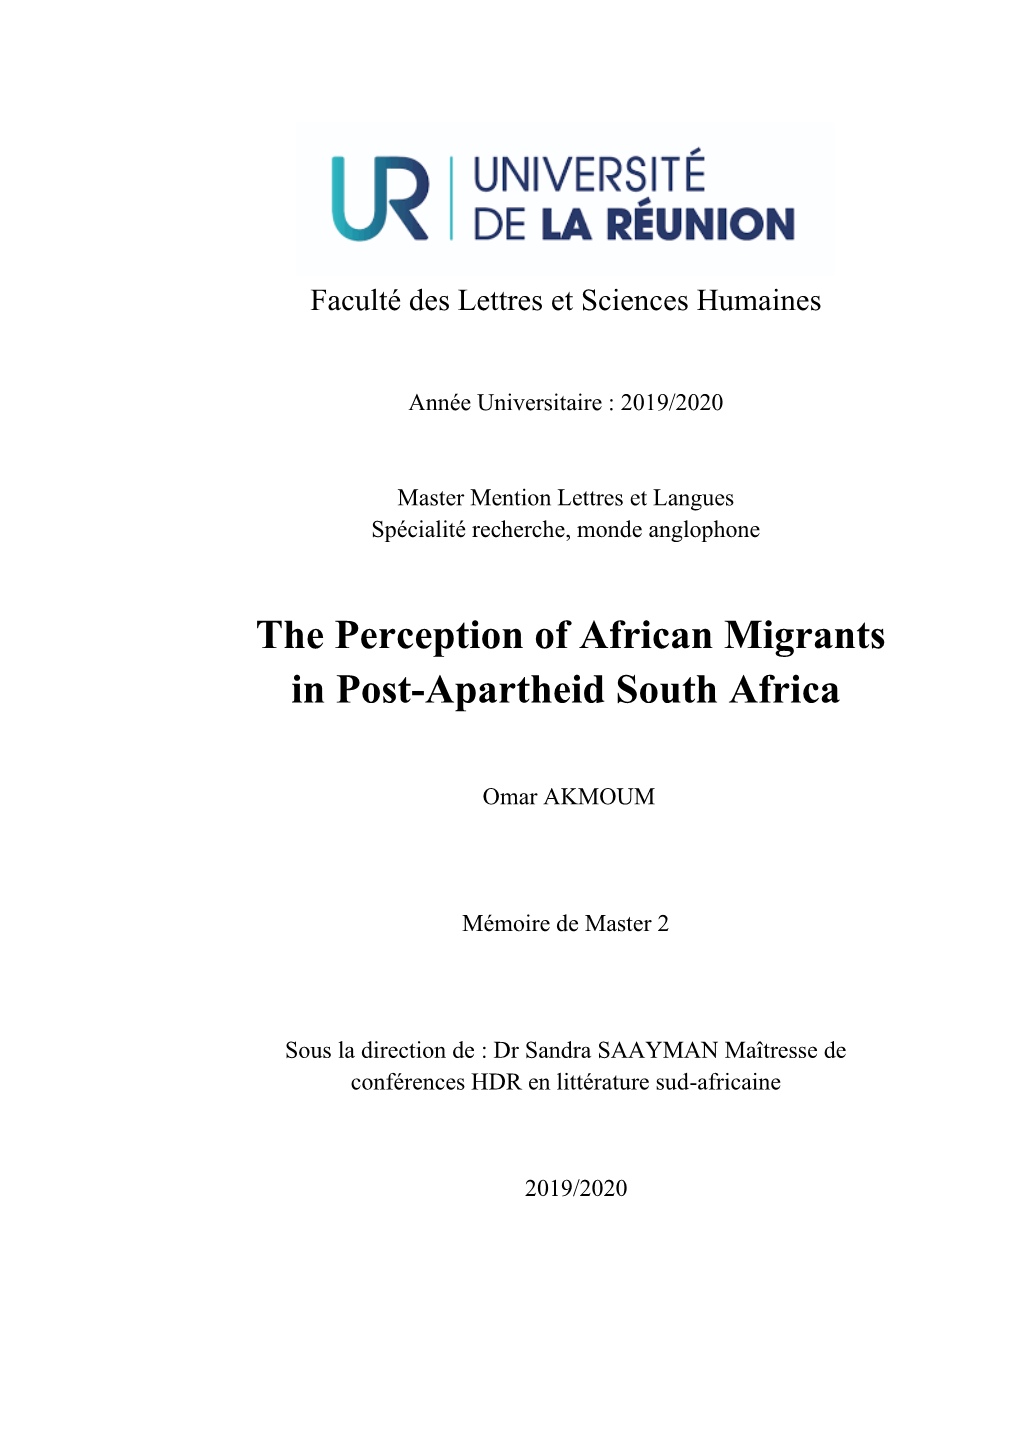 The Perception of African Migrants in Post-Apartheid South Africa